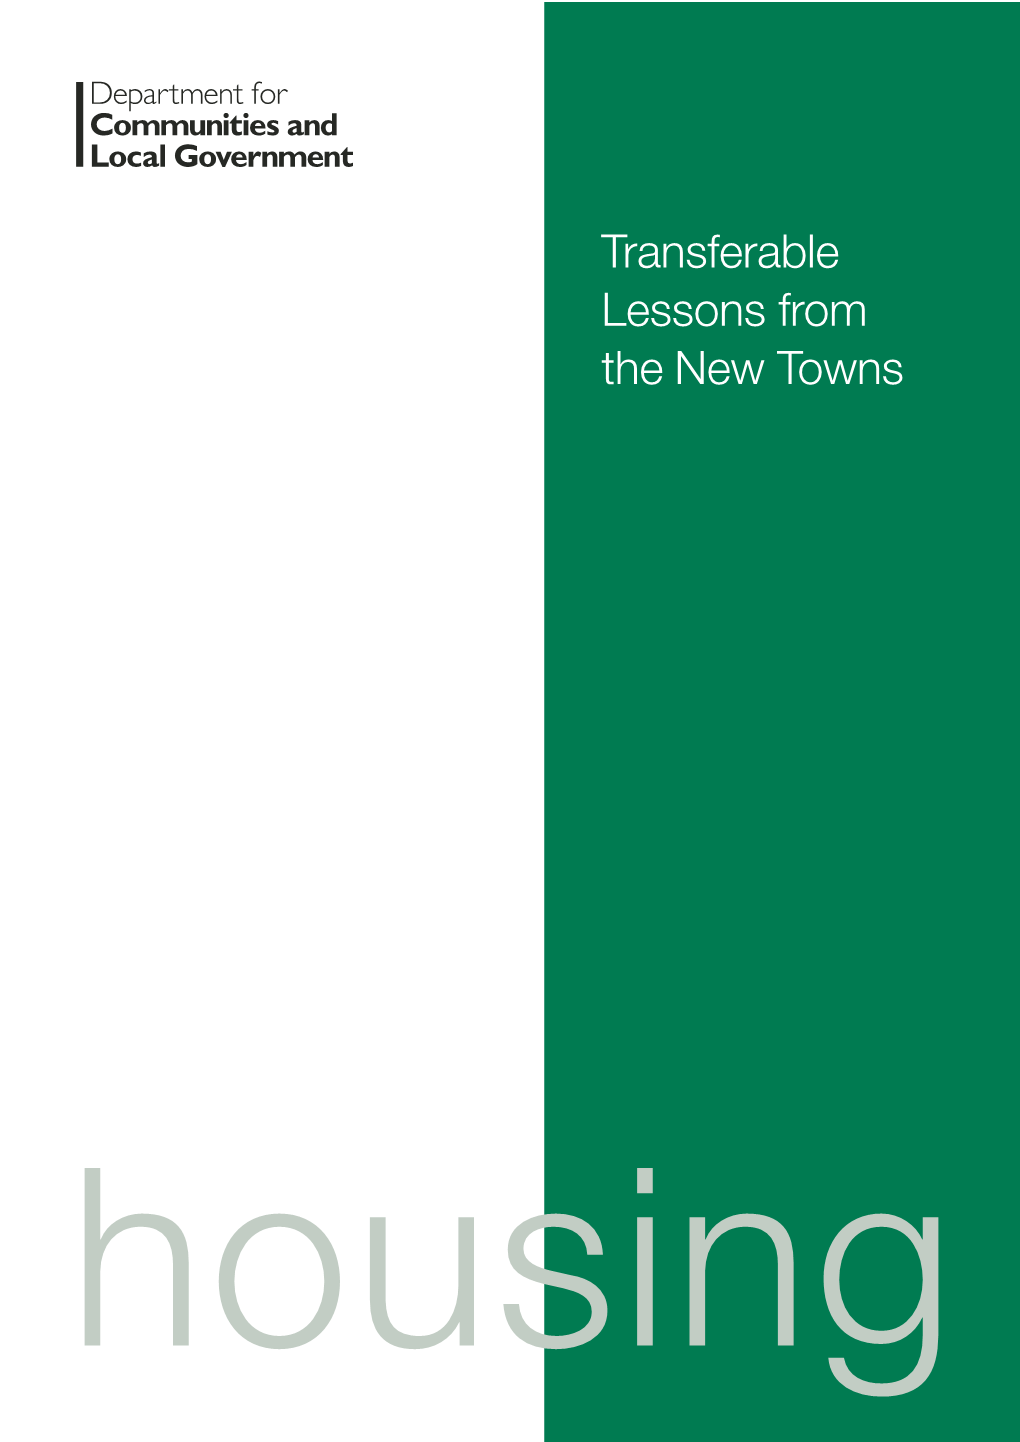 Transferable Lessons from the New Towns